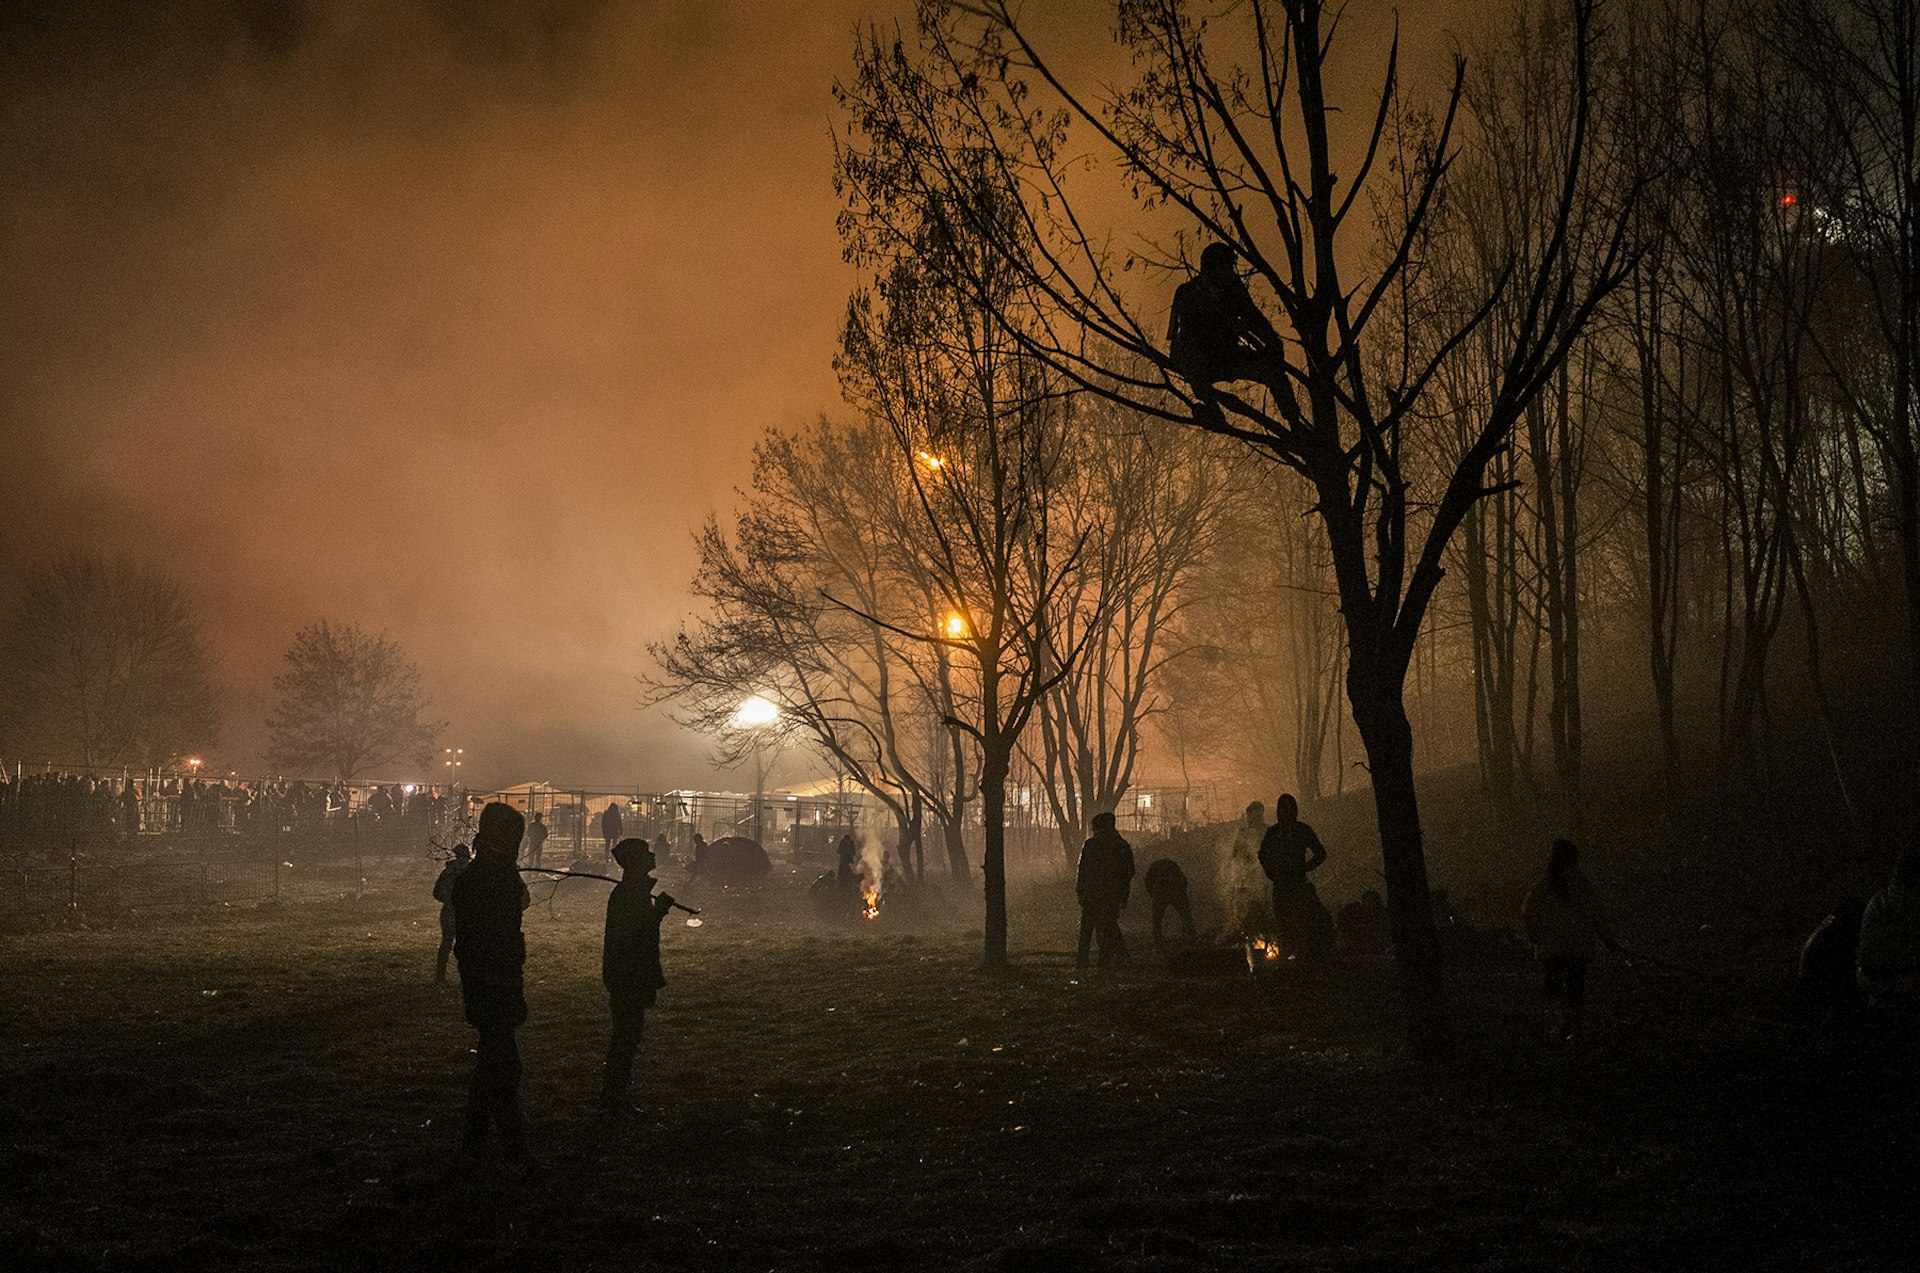 Šentilj, Slovenia, November 2015. After hours of waiting, groups of people move into a nearby field and use tree branches to make fires and keep warm.